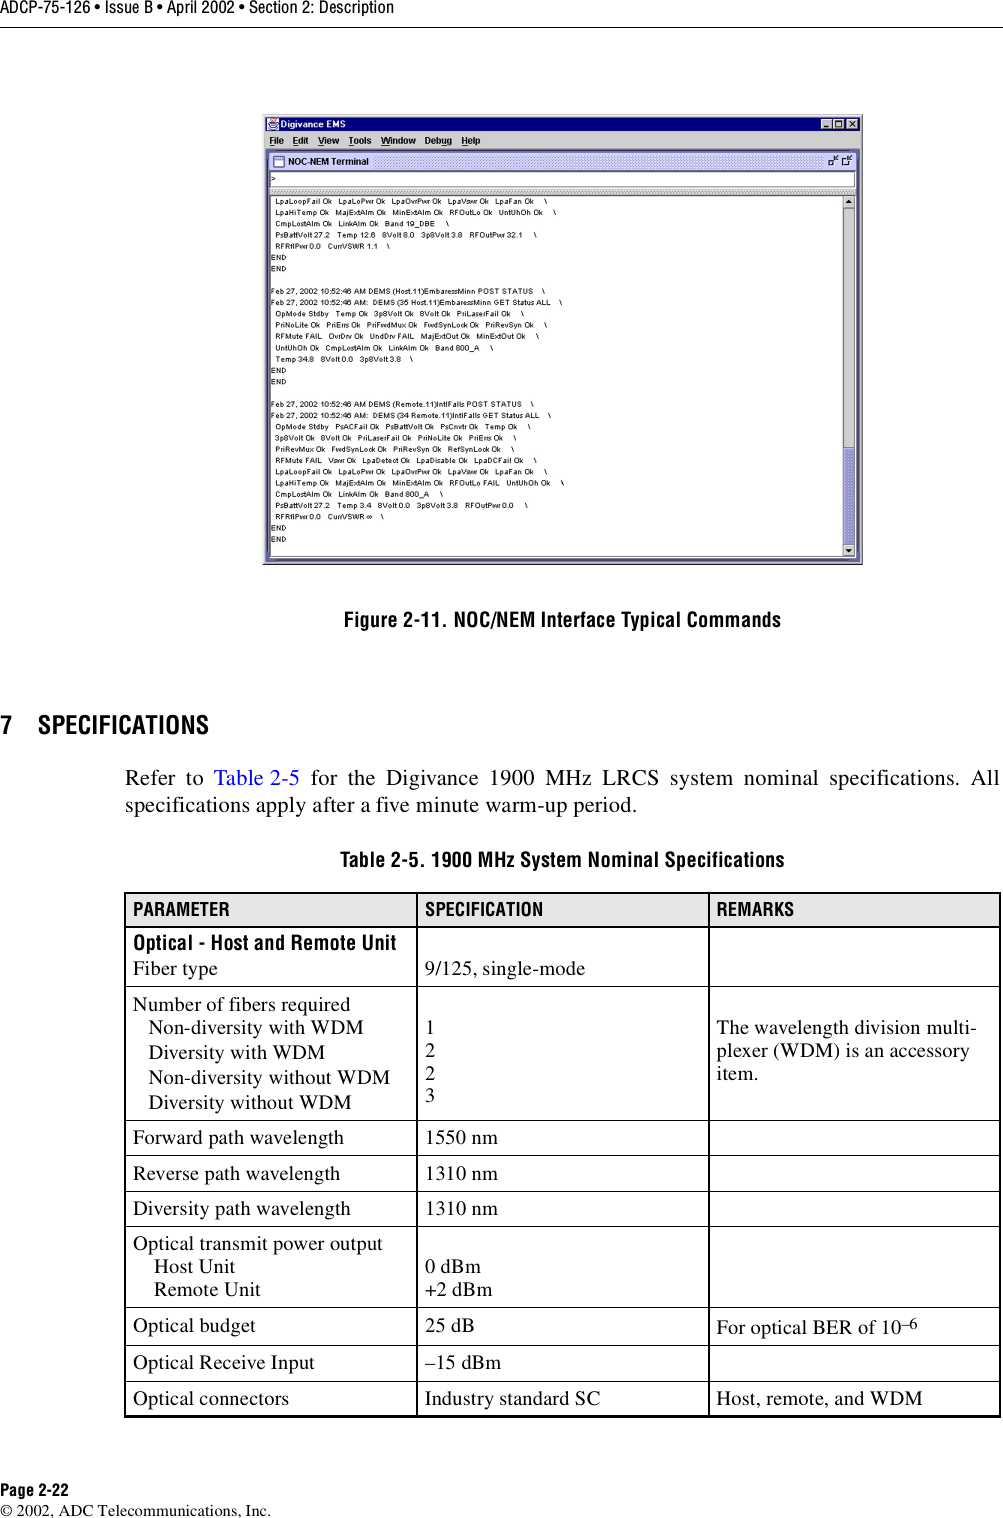 ADCP-75-126 • Issue B • April 2002 • Section 2: DescriptionPage 2-22©2002, ADC Telecommunications, Inc.Figure 2-11. NOC/NEM Interface Typical Commands7 SPECIFICATIONSRefer to Table 2-5 for the Digivance 1900 MHz LRCS system nominal specifications. Allspecifications apply after afive minute warm-up period.Table 2-5. 1900 MHz System Nominal SpecificationsPARAMETER SPECIFICATION REMARKSOptical - Host and Remote UnitFiber type 9/125, single-modeNumber of fibers requiredNon-diversity with WDMDiversity with WDMNon-diversity without WDMDiversity without WDM1223The wavelength division multi-plexer (WDM) is an accessoryitem.Forward path wavelength 1550 nmReverse path wavelength 1310 nmDiversity path wavelength 1310 nmOptical transmit power outputHost UnitRemote Unit 0dBm+2 dBmOptical budget 25 dB For optical BER of 10–6Optical Receive Input –15 dBmOptical connectors Industry standard SC Host, remote, and WDM